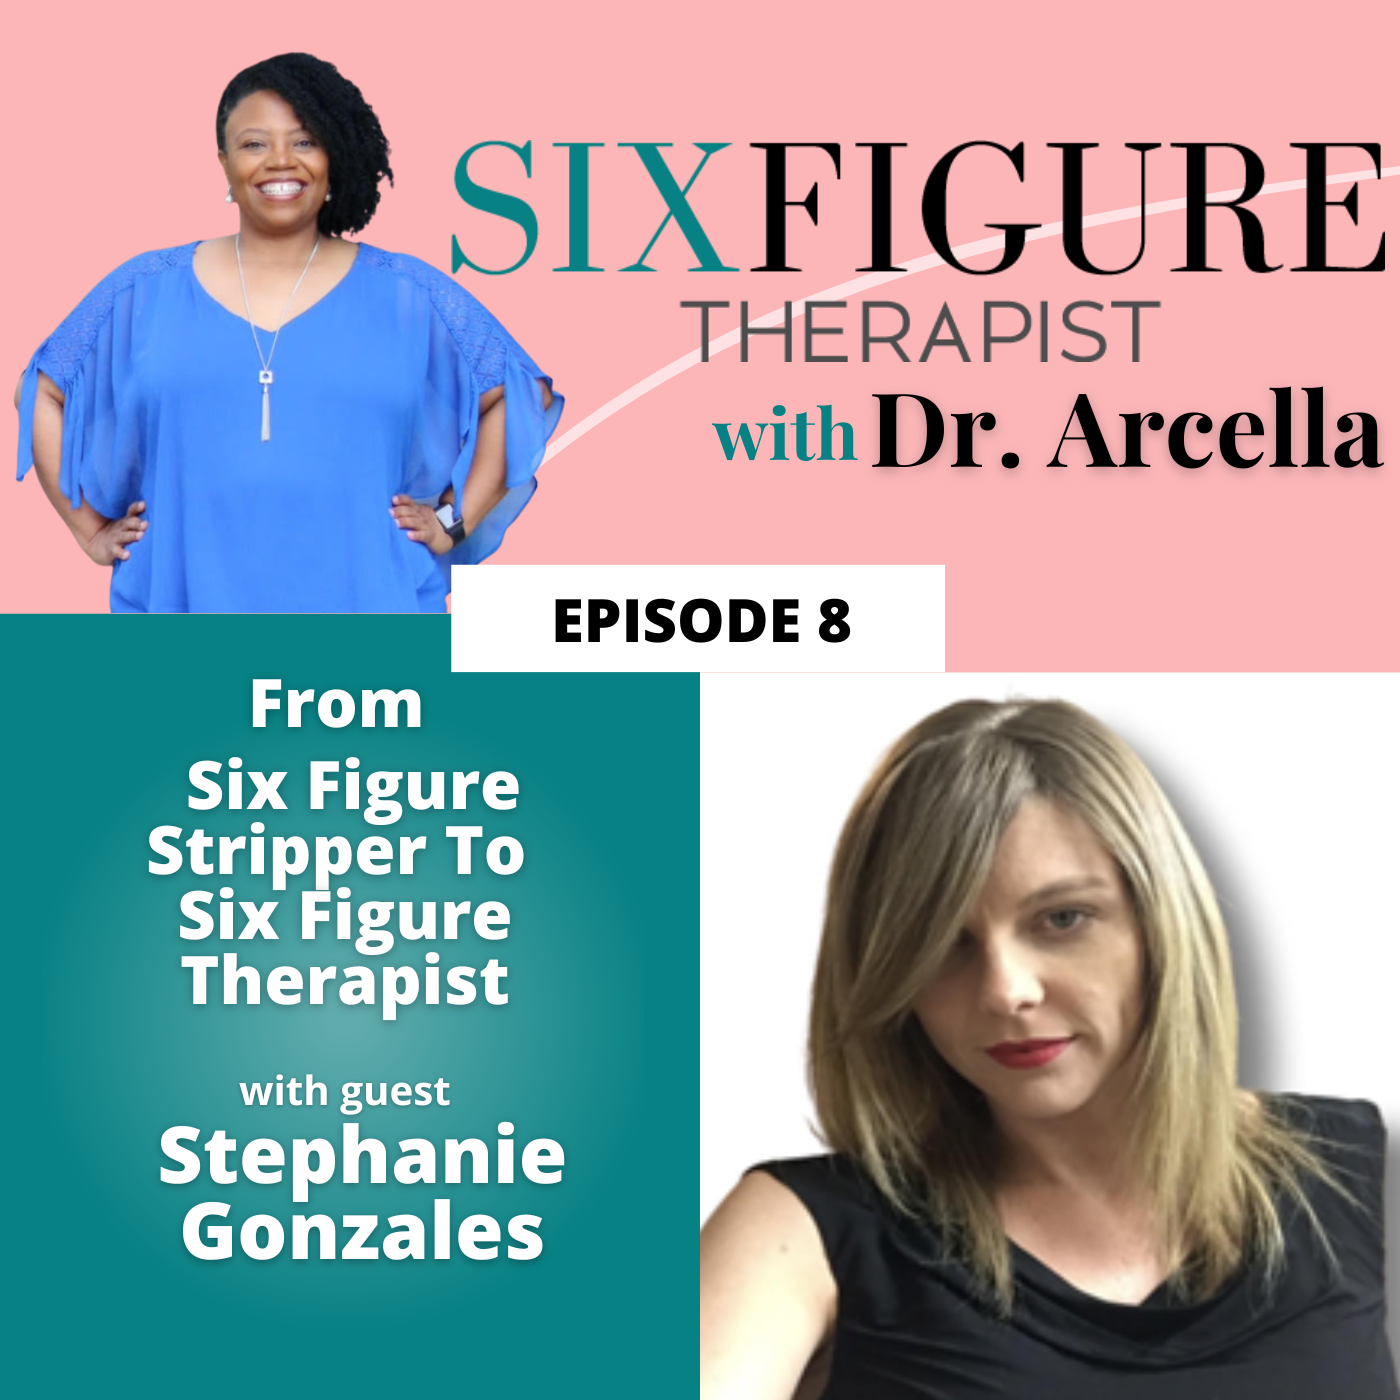 From 6-Figure Stripper To 6-Figure Therapist